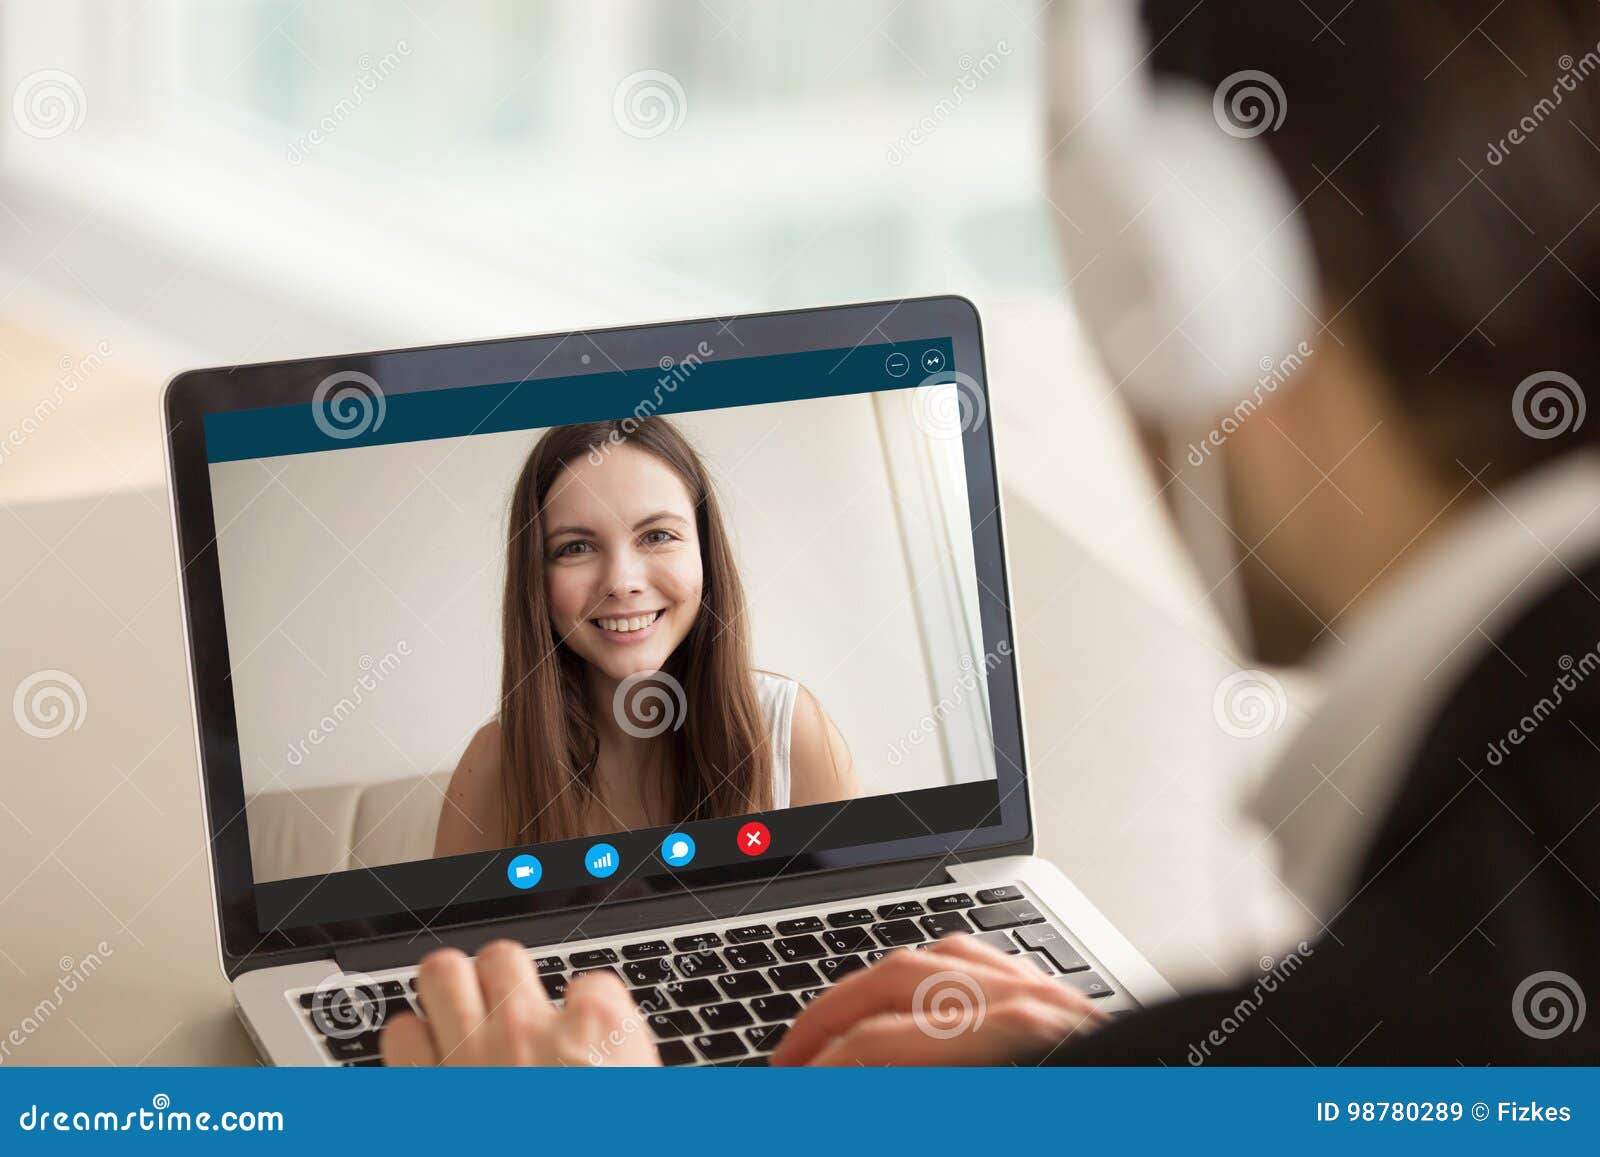 Video chat with girl